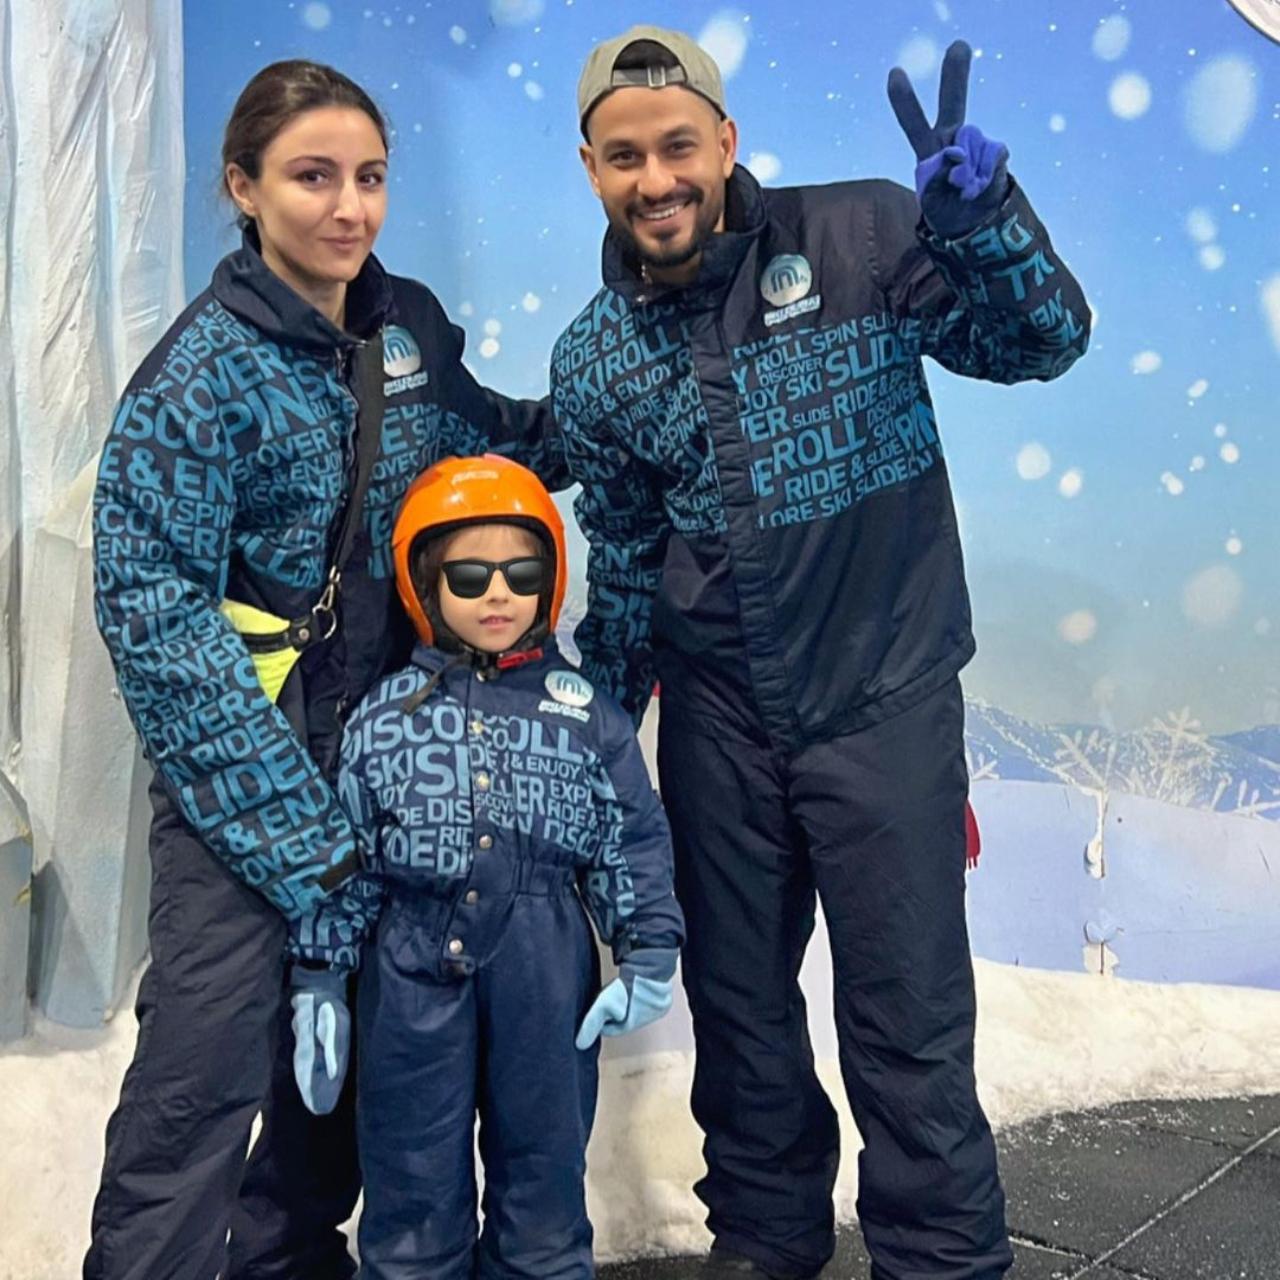 The family twins in cold weather outfits as they pose at what looks like Snowworld. Inaaya looks adorable in a blue jumpsuit and an orange cap